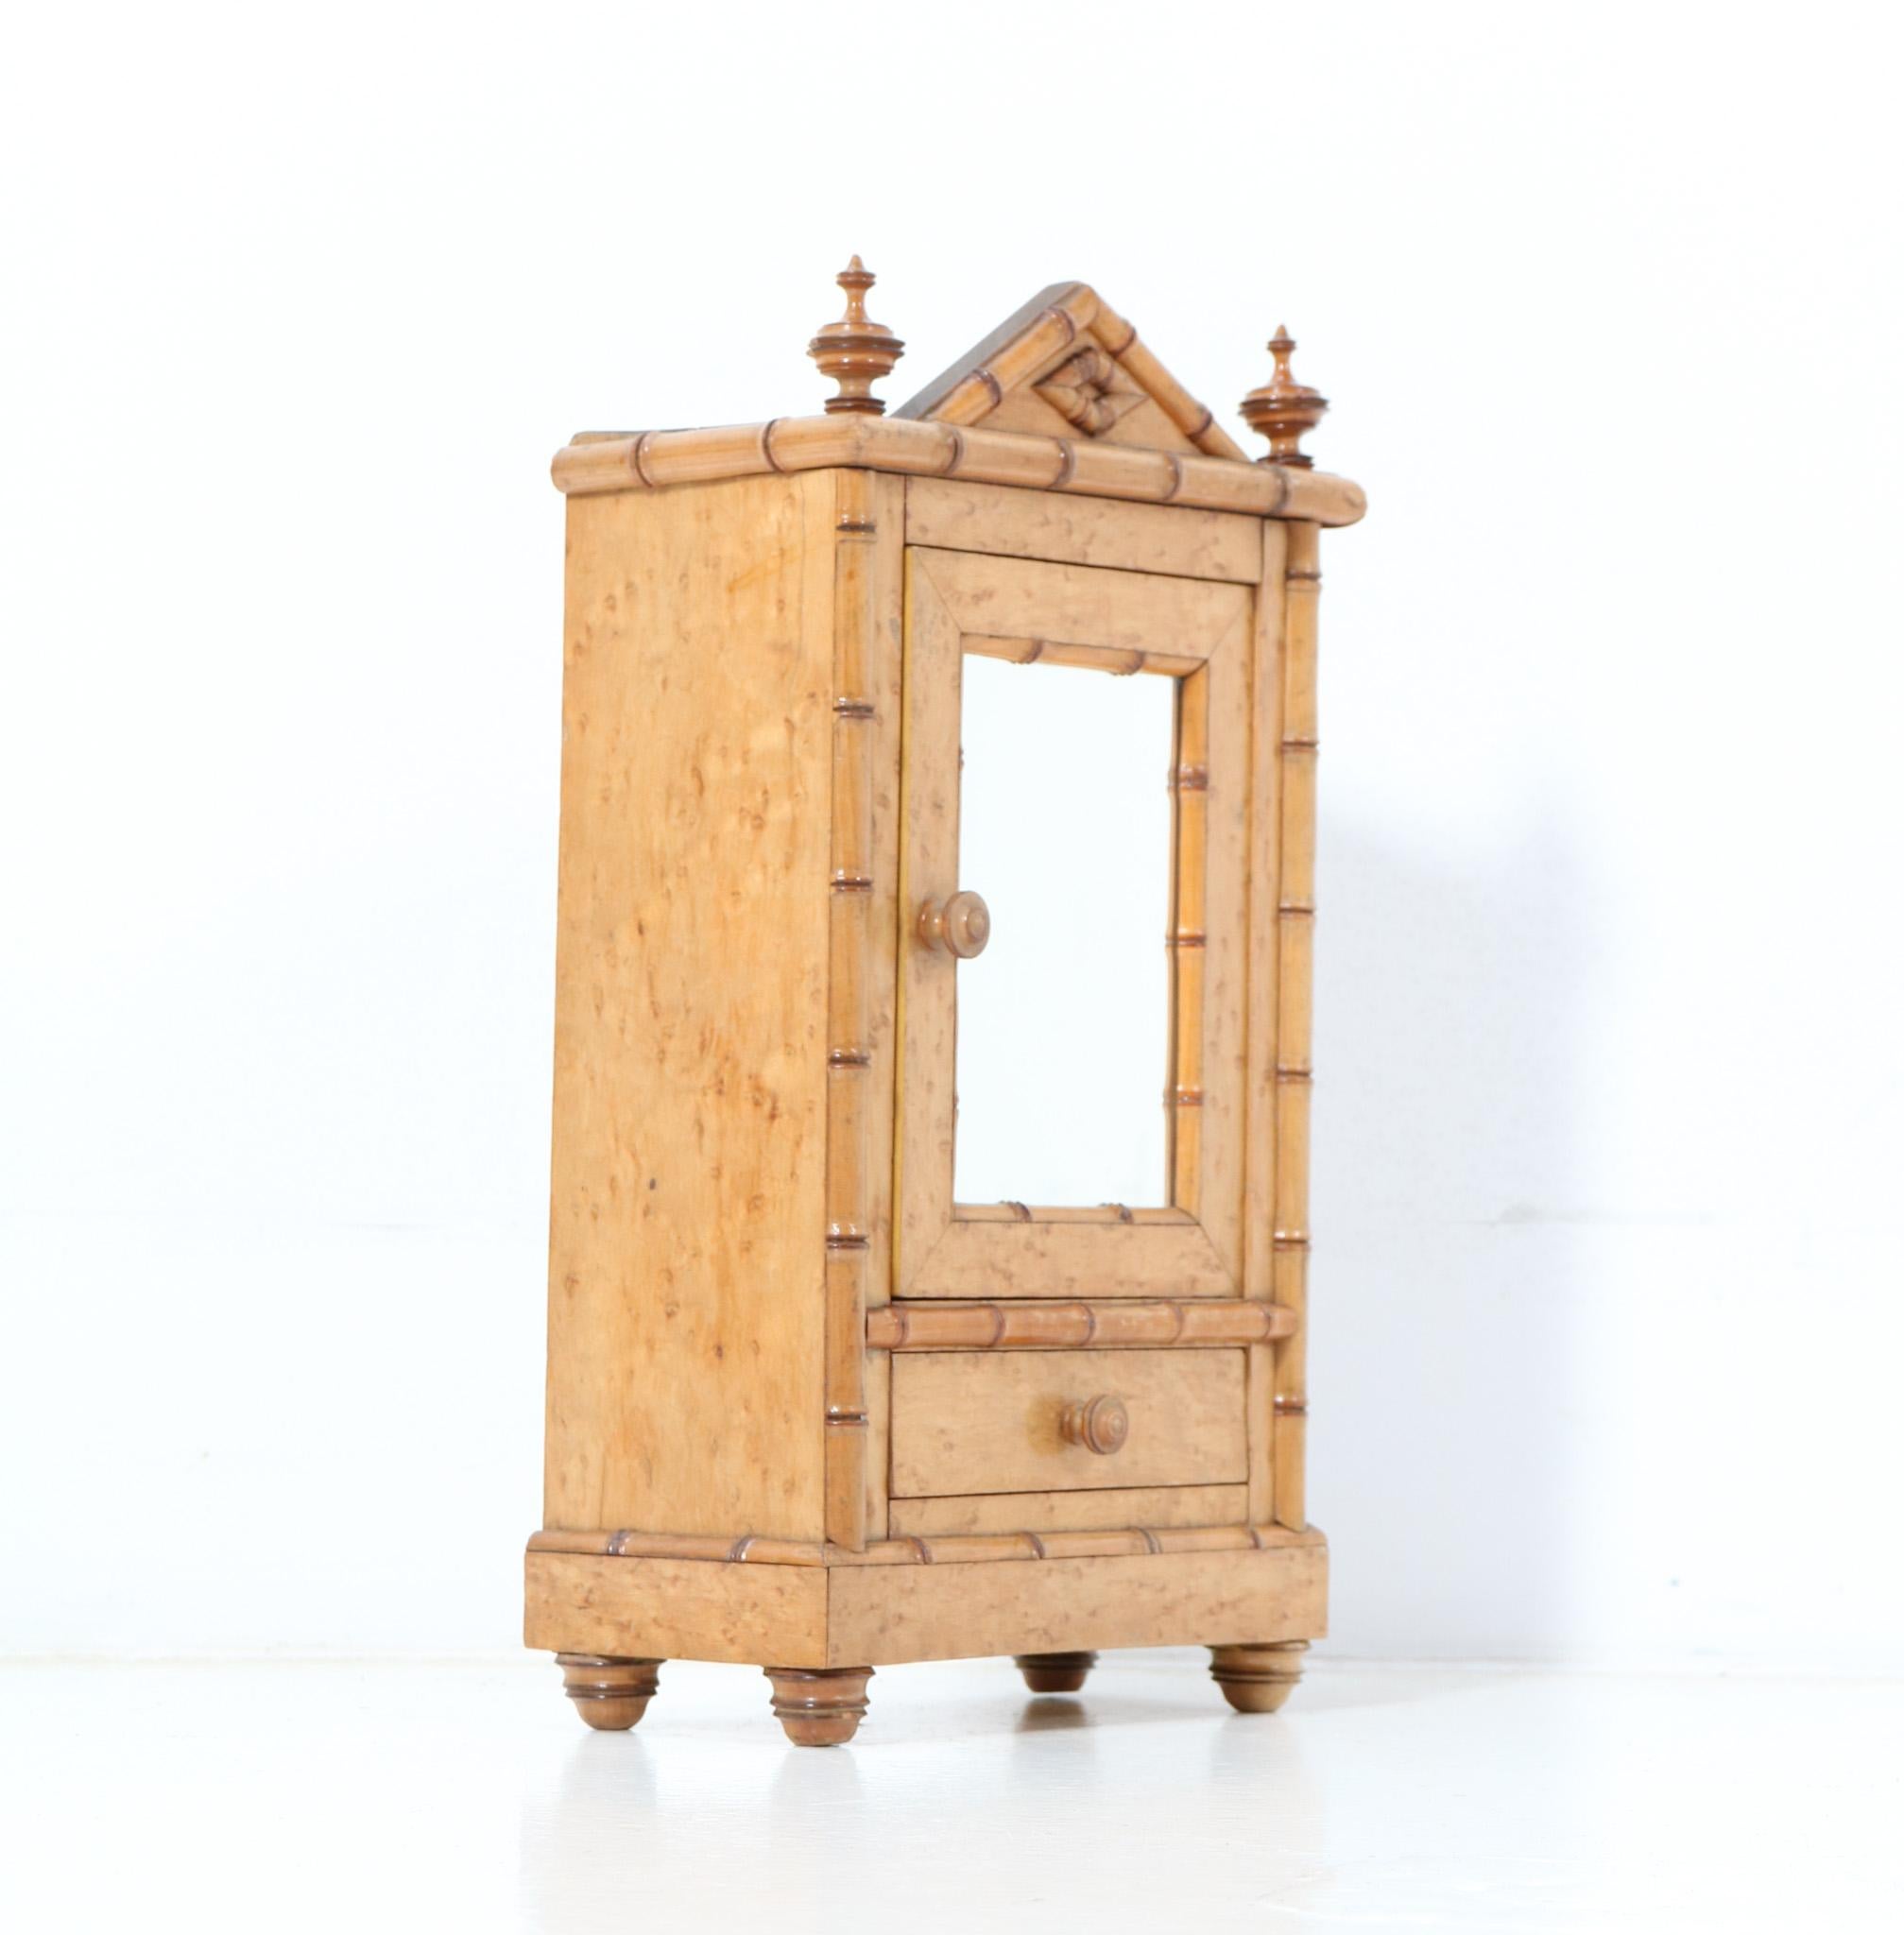 Magnificent and ultra rare French Provincial miniature armoire or wardrobe.
Striking French design from the 1900s.
Executed in birds-eye maple and faux bamboo, this stunning piece of craftsmanship is a true example of the exciting decorative